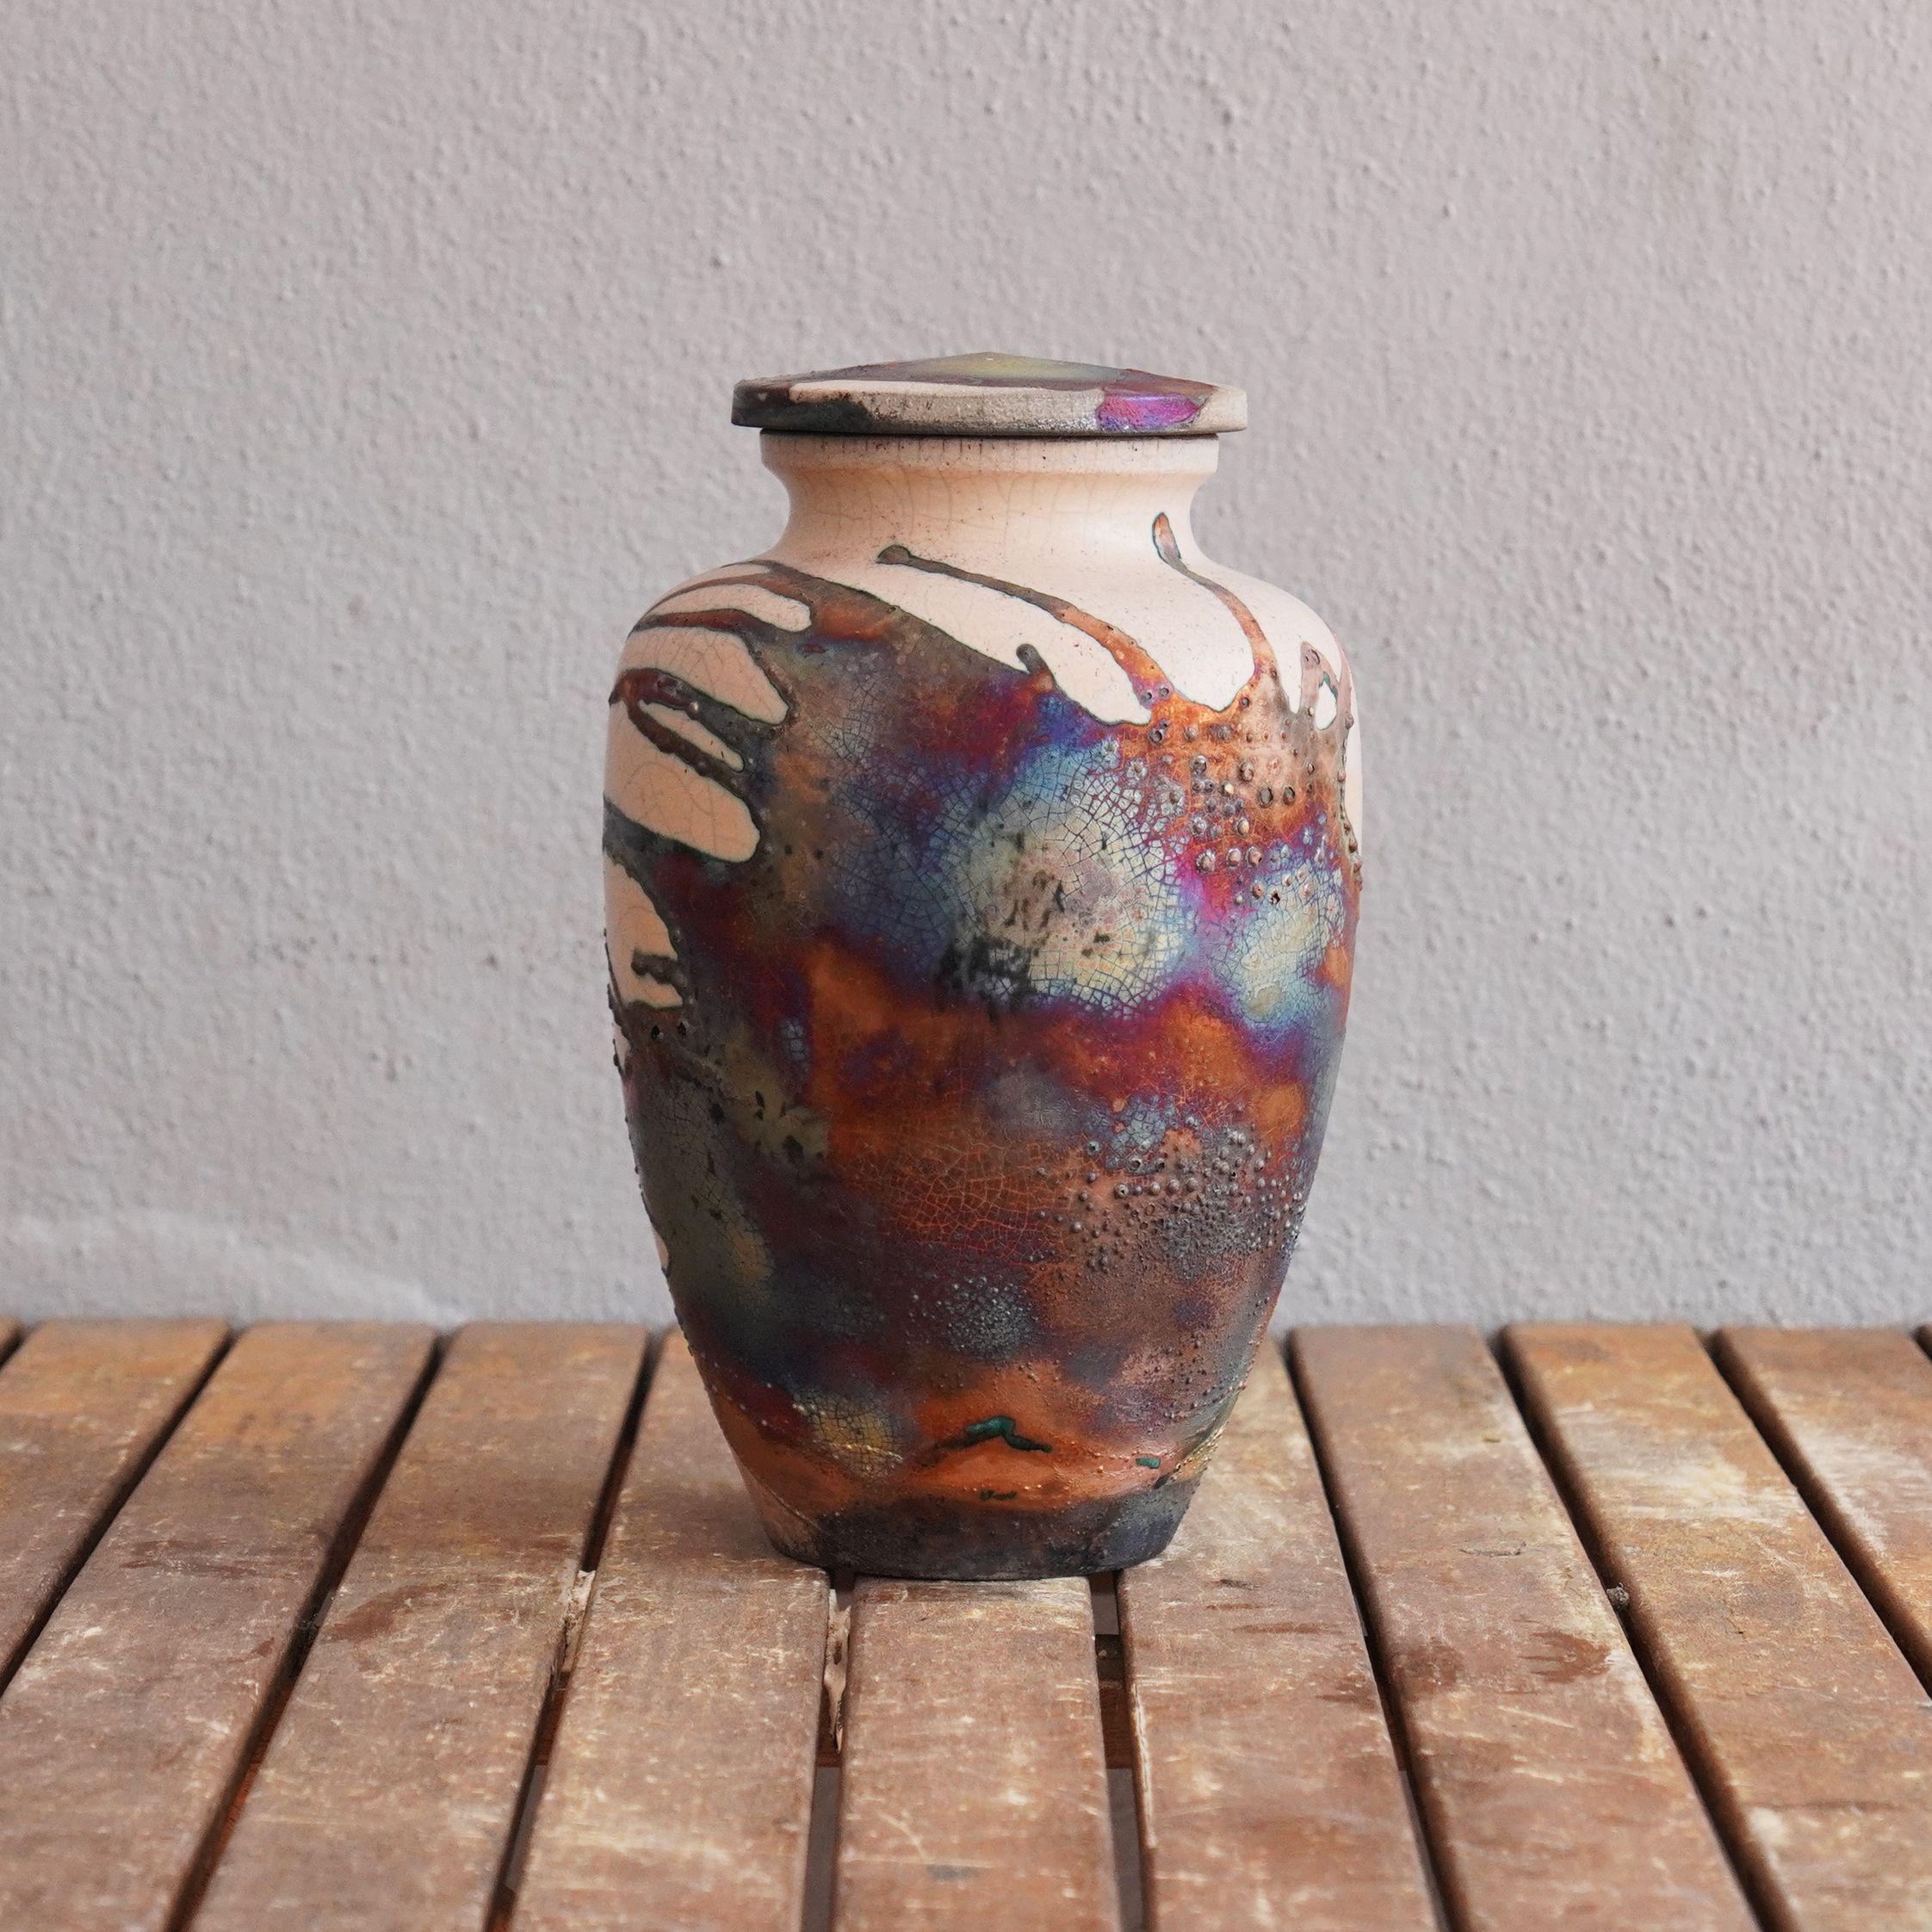 Omoide ~ (思い出) - memories.
 
The passing of a loved one will always be a defining moment in a person's life. The Omoide Urn is a one of a kind ceramic piece that offers a focal point to reminisce on the mememories left behind by your loved